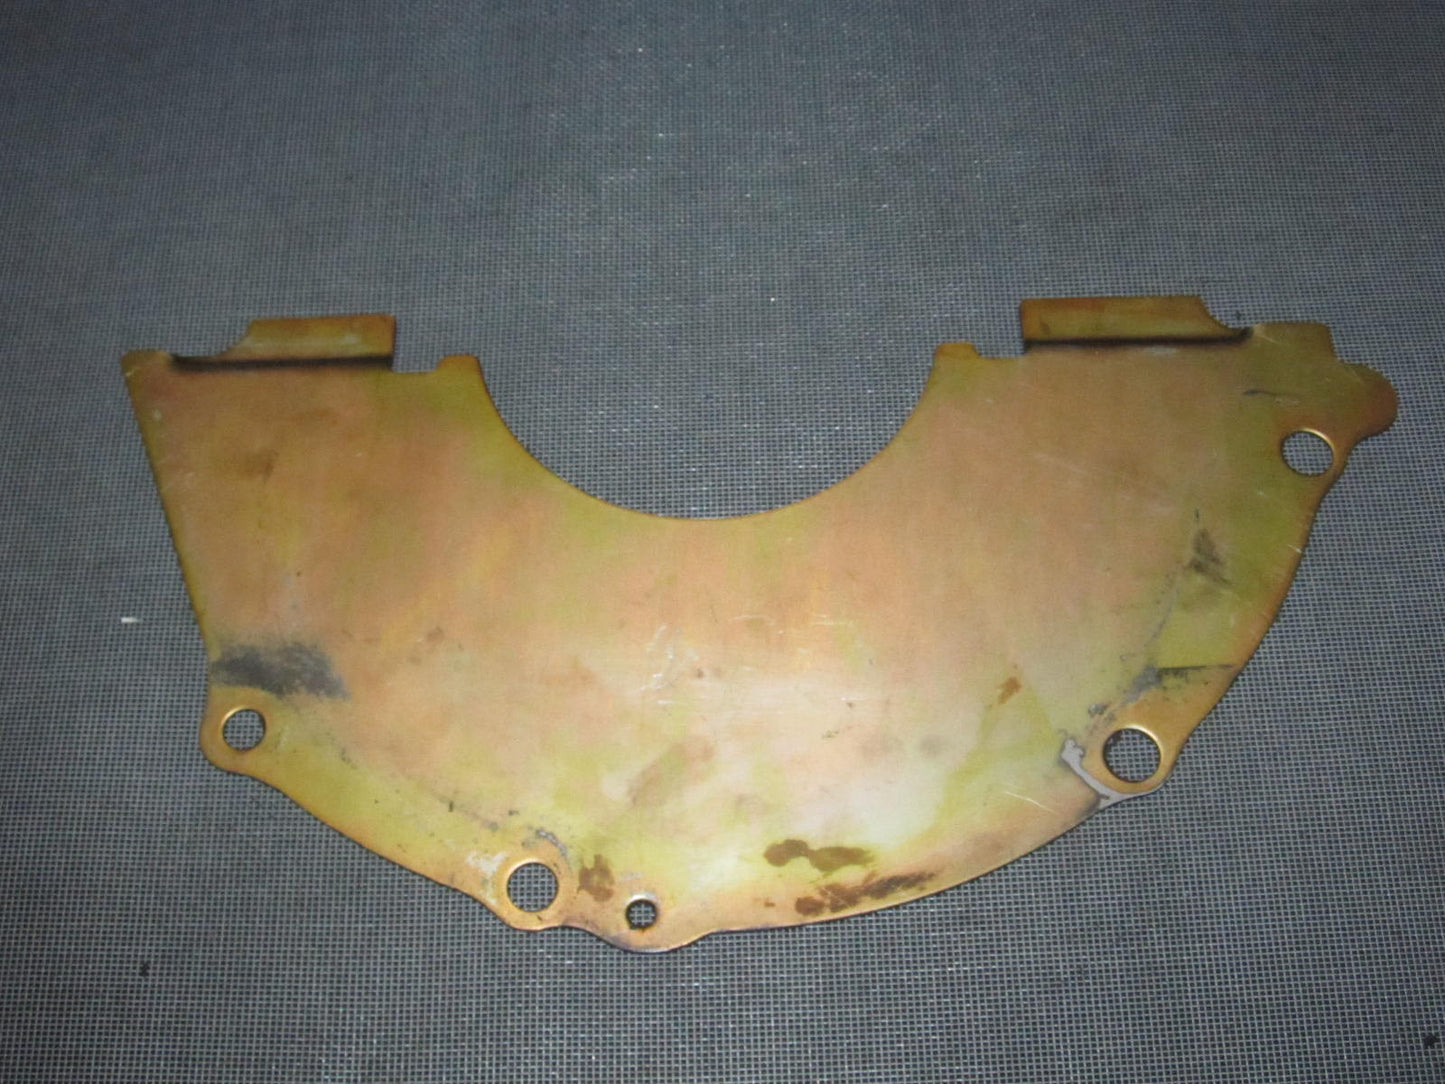 90 91 92 93 94 95 96 Nissan 300zx Engine Trasmission Mounting Plate